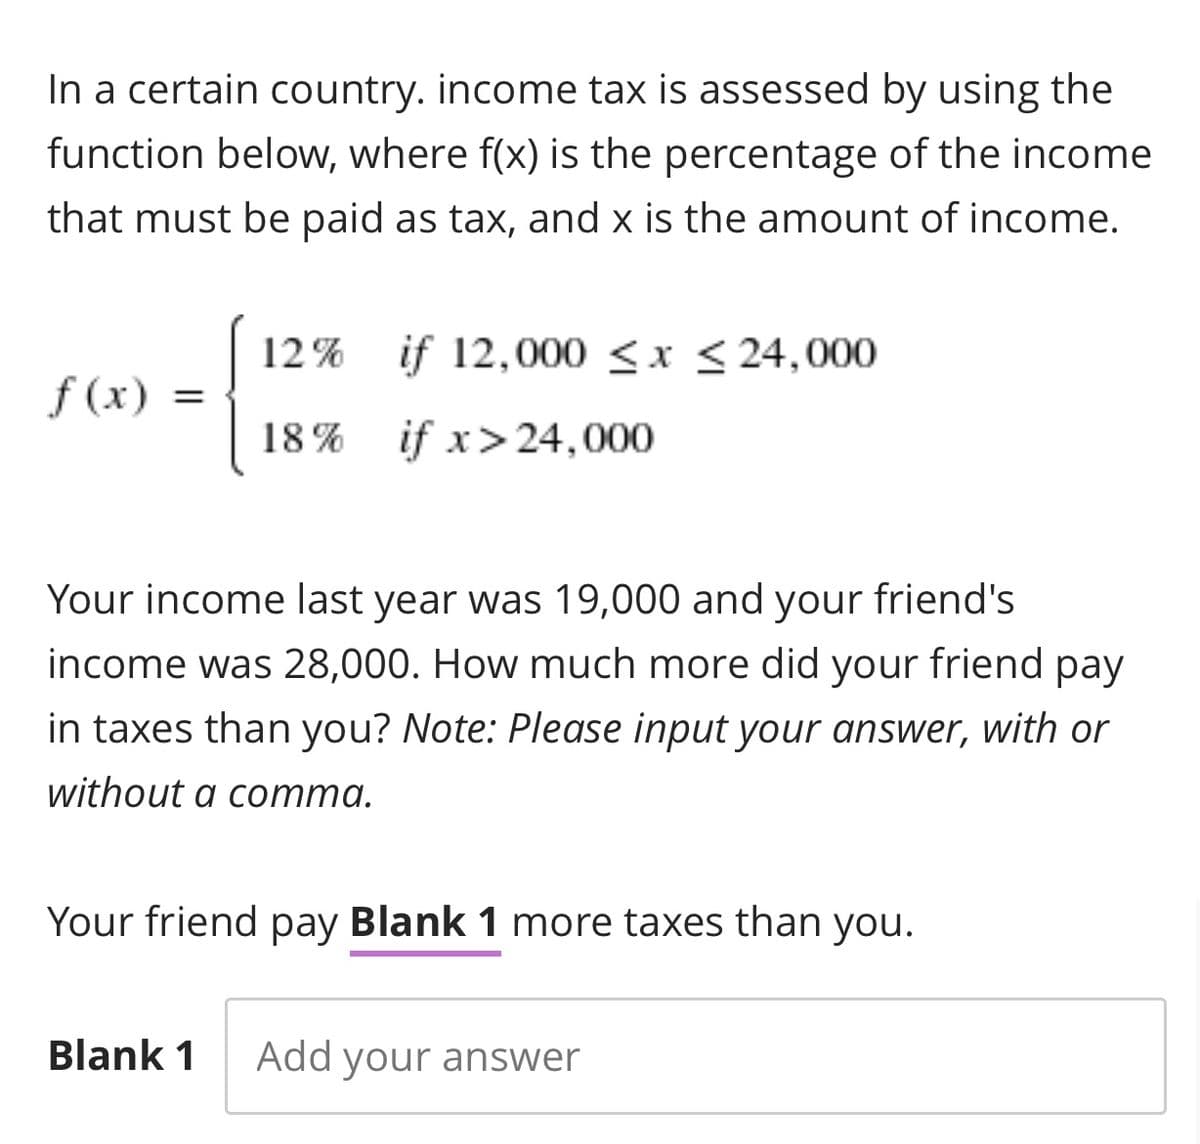 In a certain country. income tax is assessed by using the
function below, where f(x) is the percentage of the income
that must be paid as tax, and x is the amount of income.
12% if 12,000 ≤x≤24,000
f(x) =
18% if x>24,000
Your income last year was 19,000 and your friend's
income was 28,000. How much more did your friend pay
in taxes than you? Note: Please input your answer, with or
without a comma.
Your friend pay Blank 1 more taxes than you.
Blank 1 Add your answer